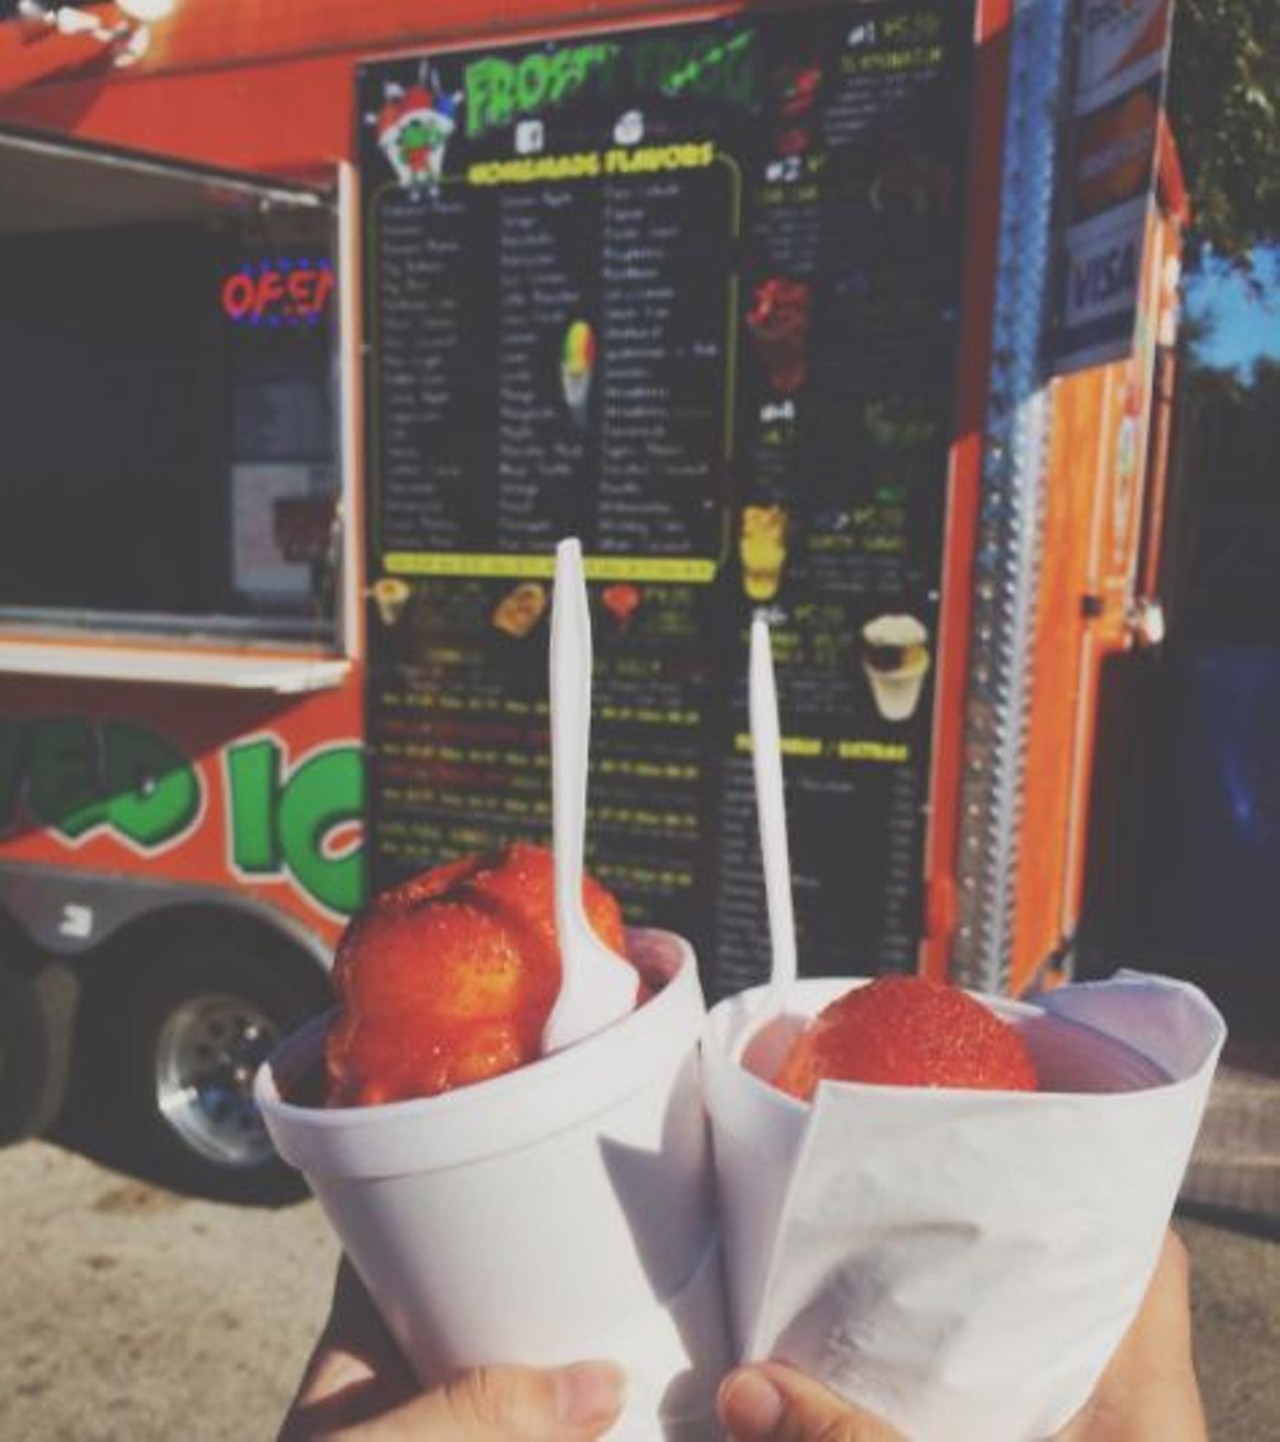 The Frosty Frog
(210) 835-5978,
facebook.com/thefrostyfrog.ceo
Cool off with some shaved ice and mangonadas from this chill truck.
Photo via Instagram 
ambergutie
